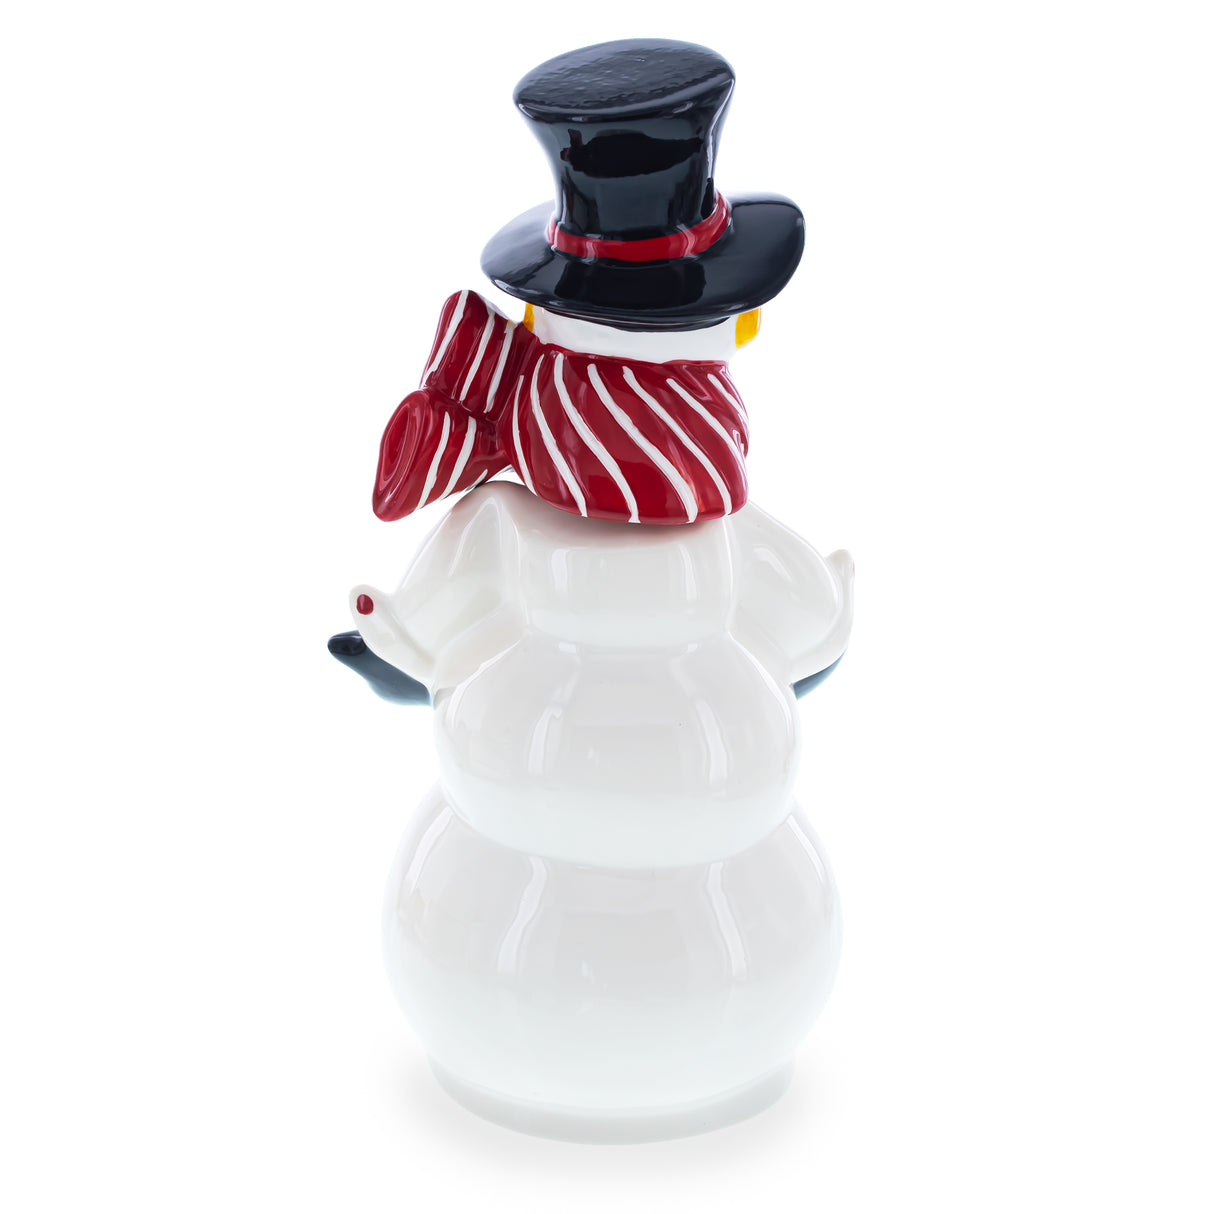 Snowman Wine Bottle Stopper 11 Inches ,dimensions in inches: 11 x 5 x